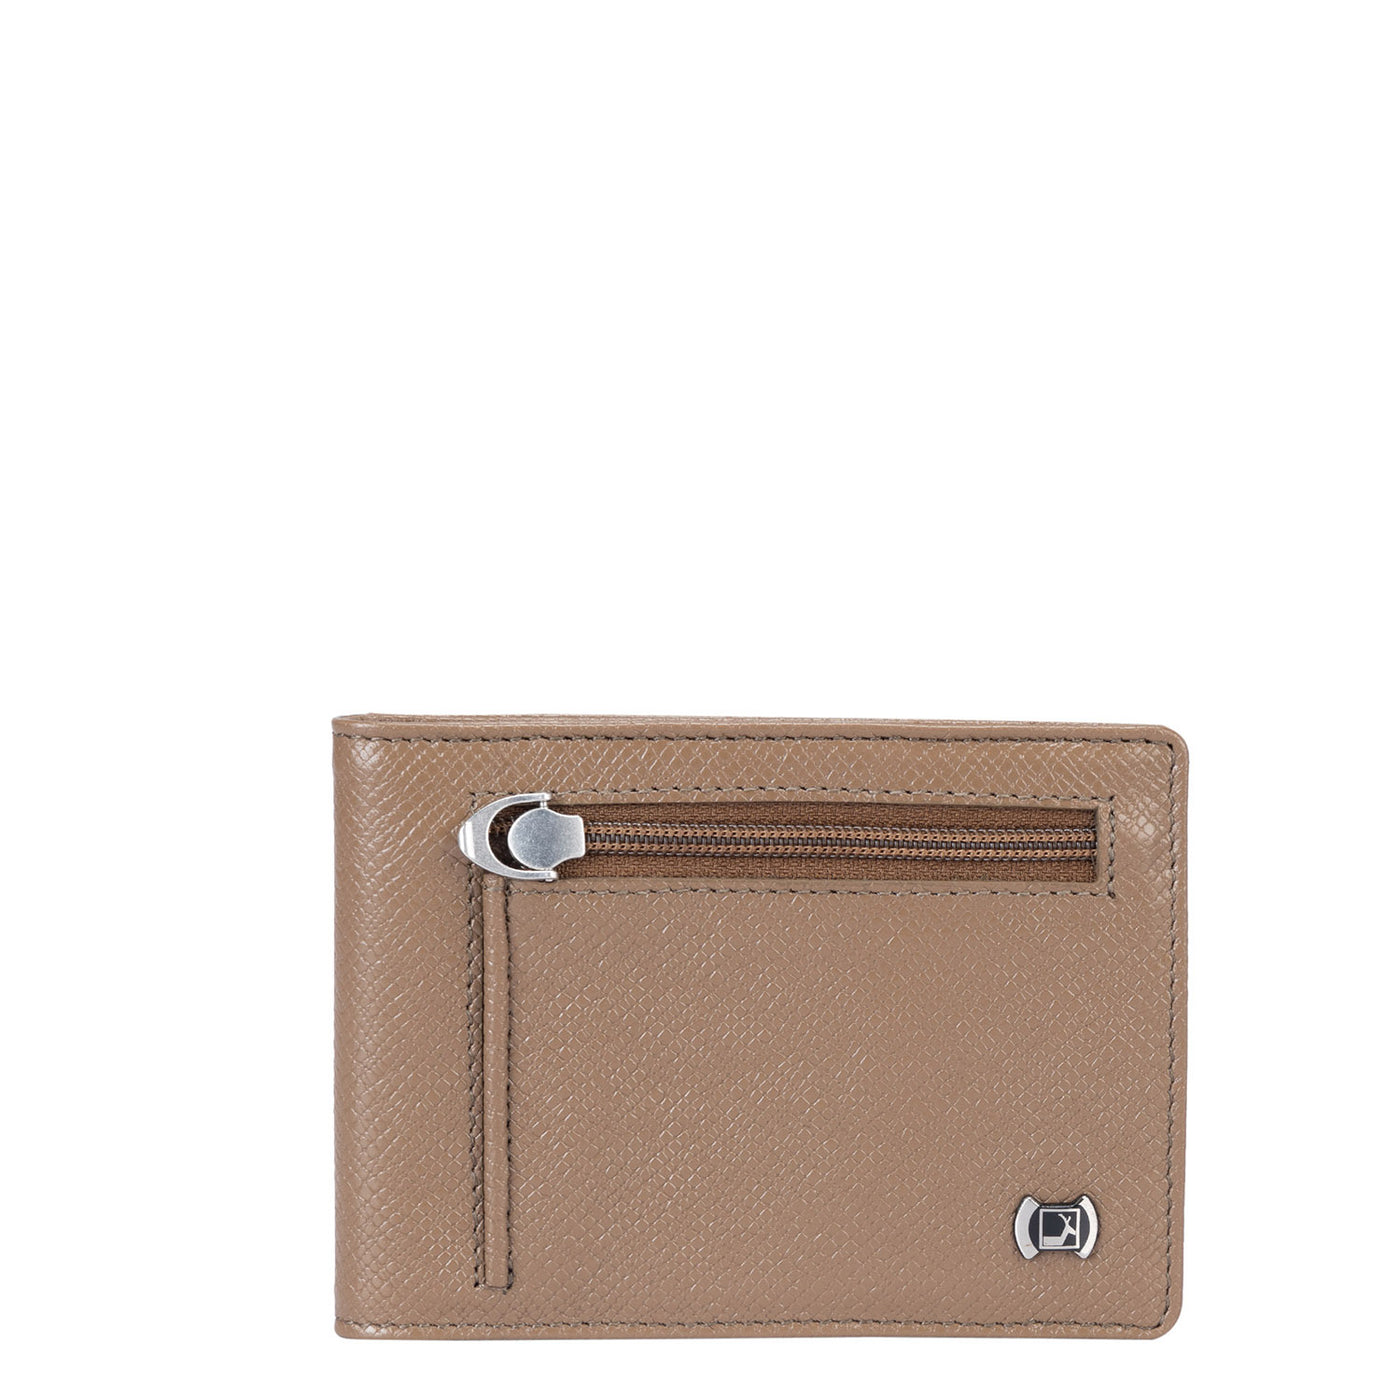 Franzy Leather Money Clip - Cafe